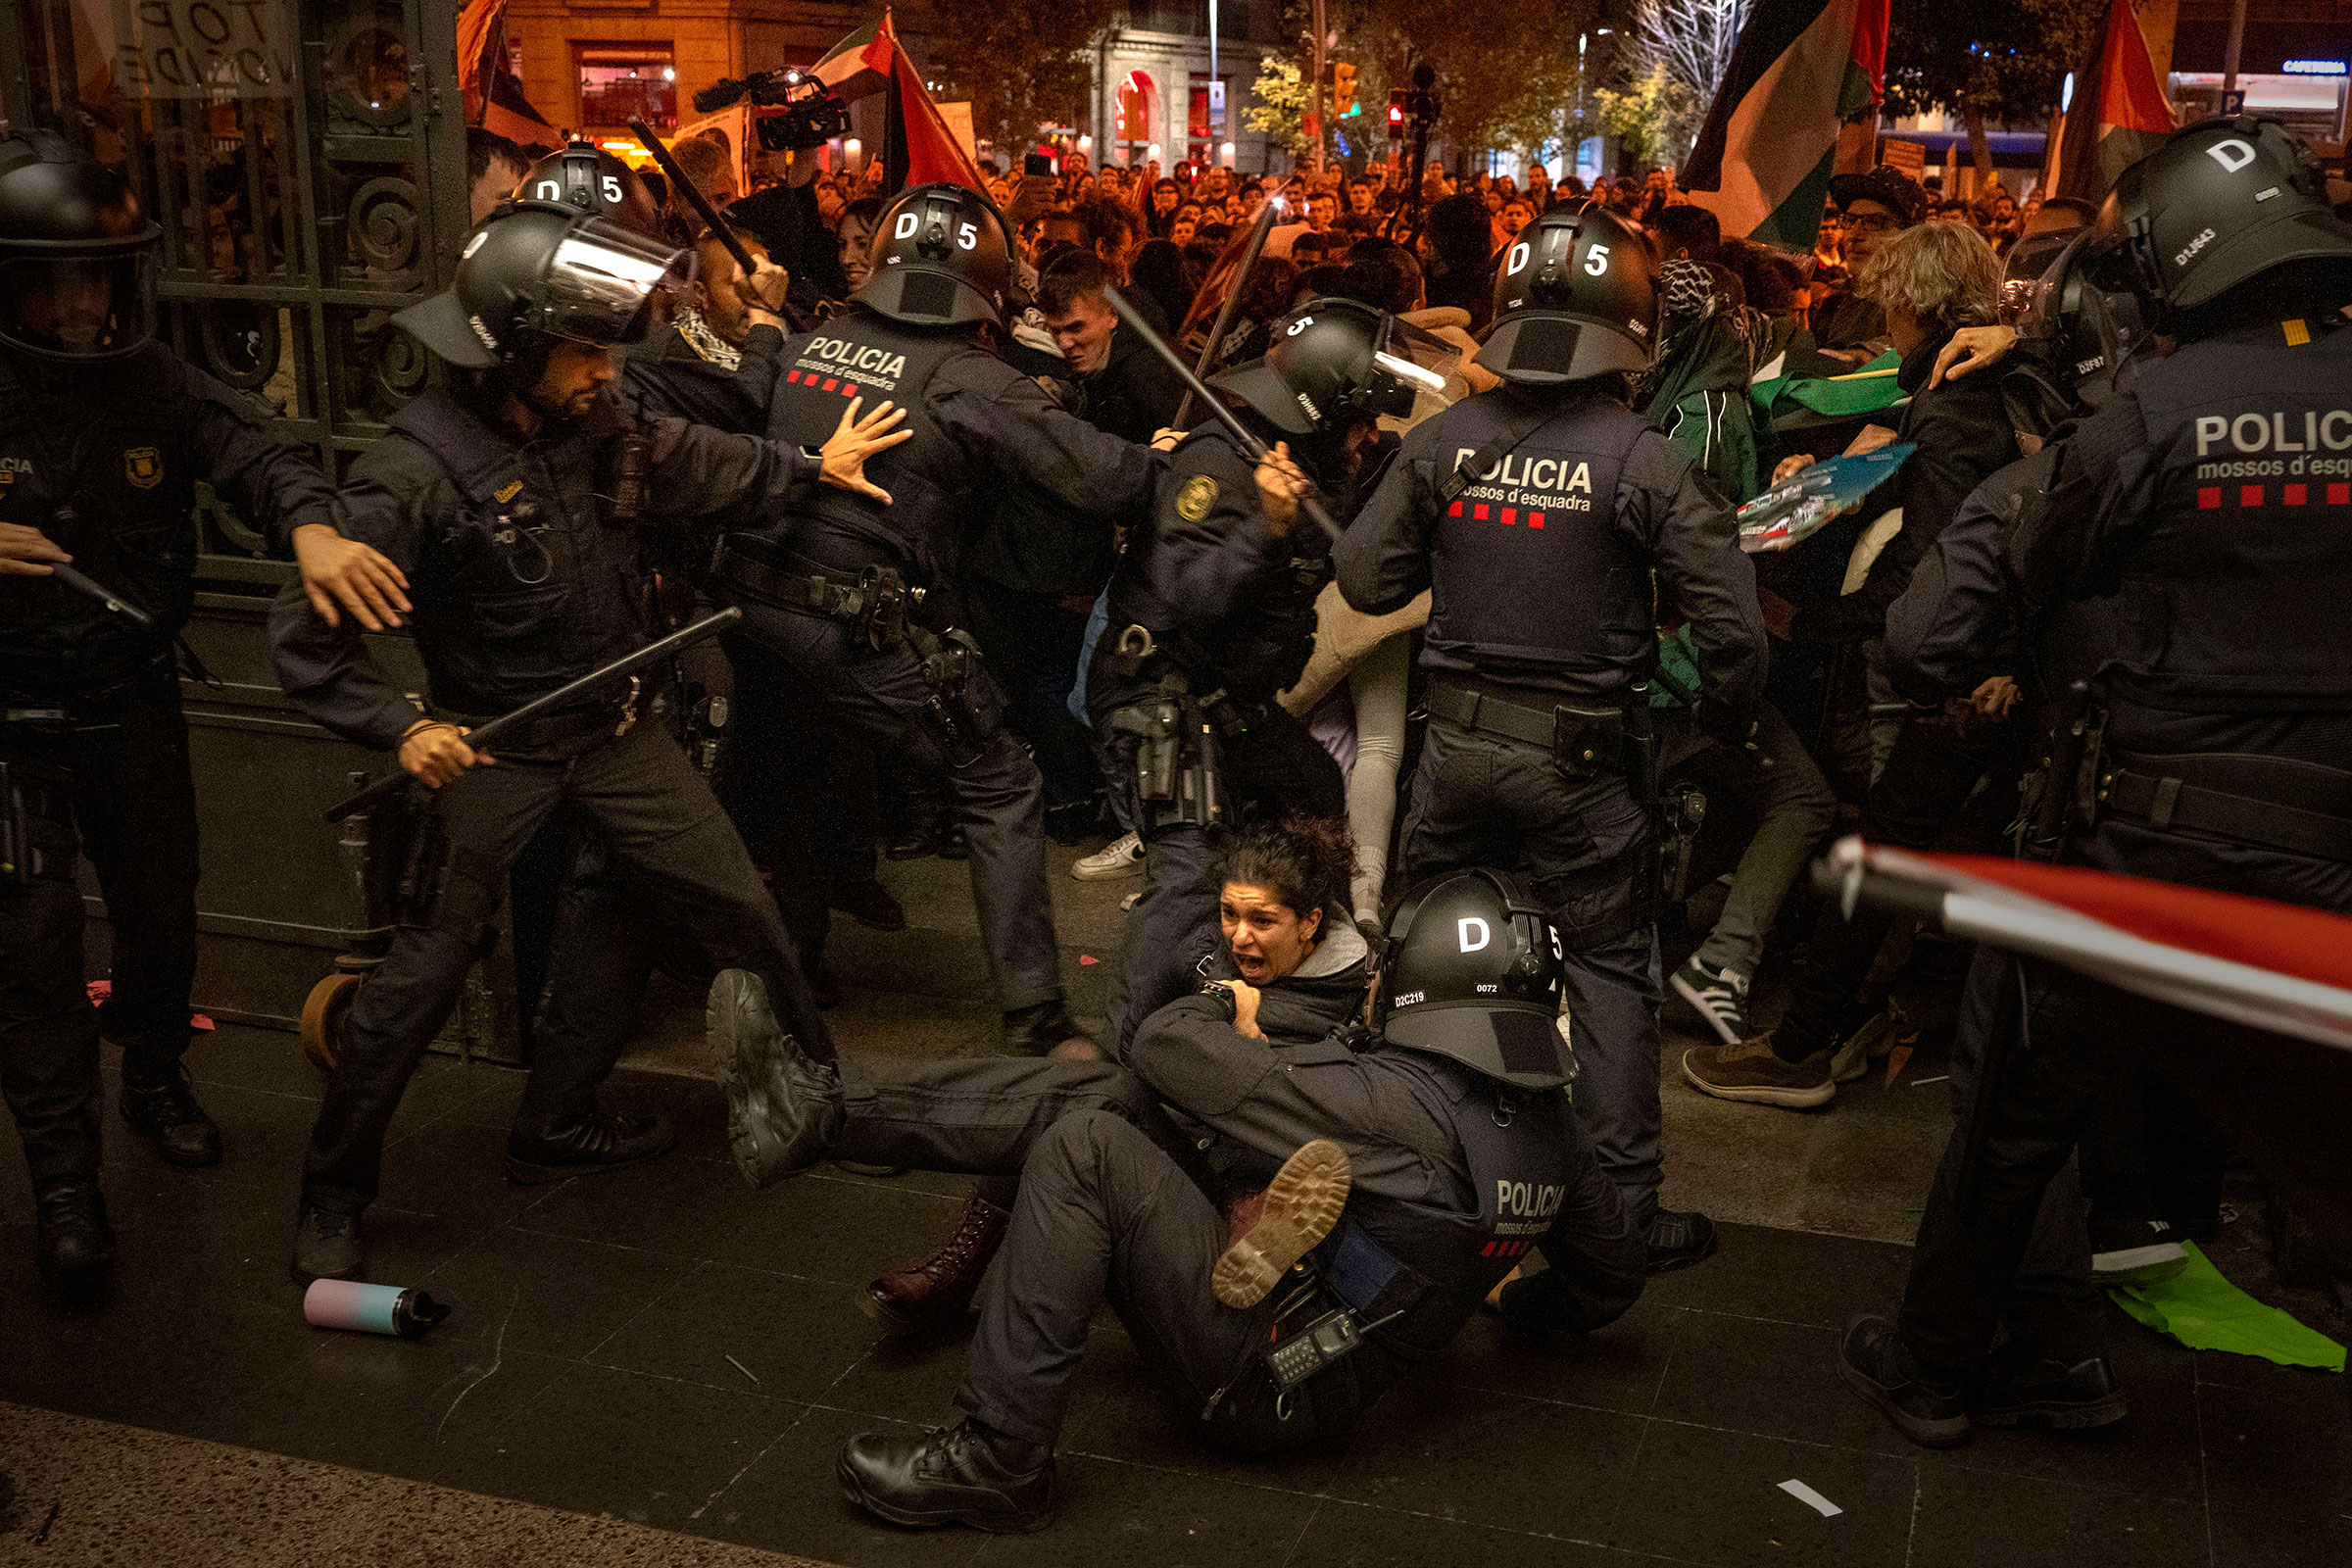 Police officers clash with pro-Palestinian demonstrators as they try to enter a train station in Barcelona, Spain, on Nov. 11. The protesters were part of a group of many thousands more who had earlier took part in an authorized march against Israel's response in Gaza to a deadly attack by Hamas on Oct. 7.